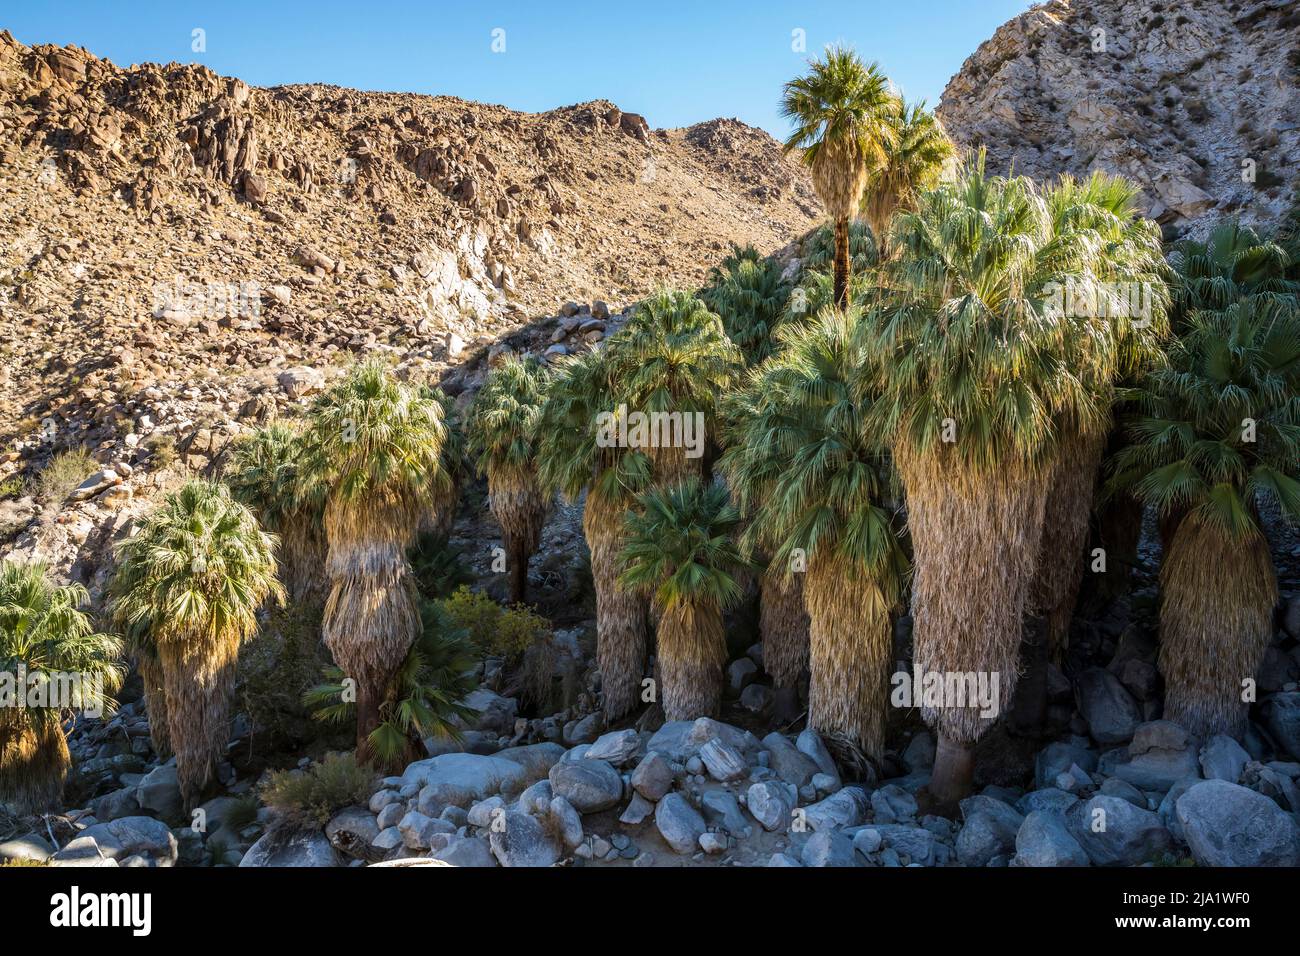 At the Fortynine Palms Desert Oasis in Joshua Tree National Park. Stock Photo